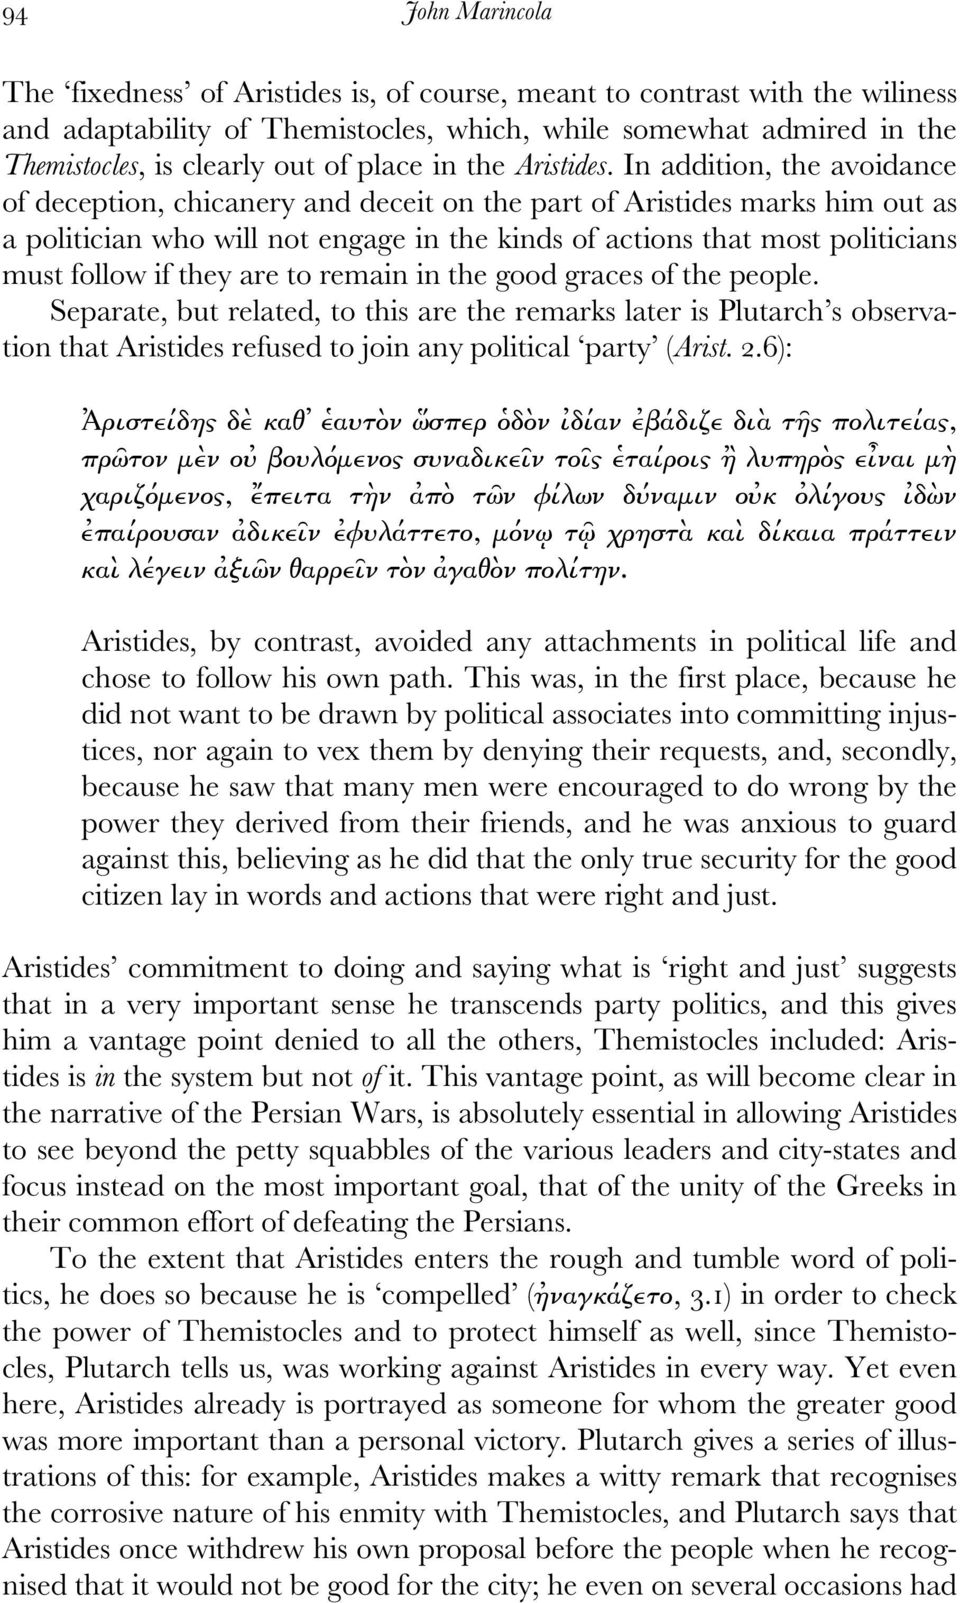 In addition, the avoidance of deception, chicanery and deceit on the part of Aristides marks him out as a politician who will not engage in the kinds of actions that most politicians must follow if